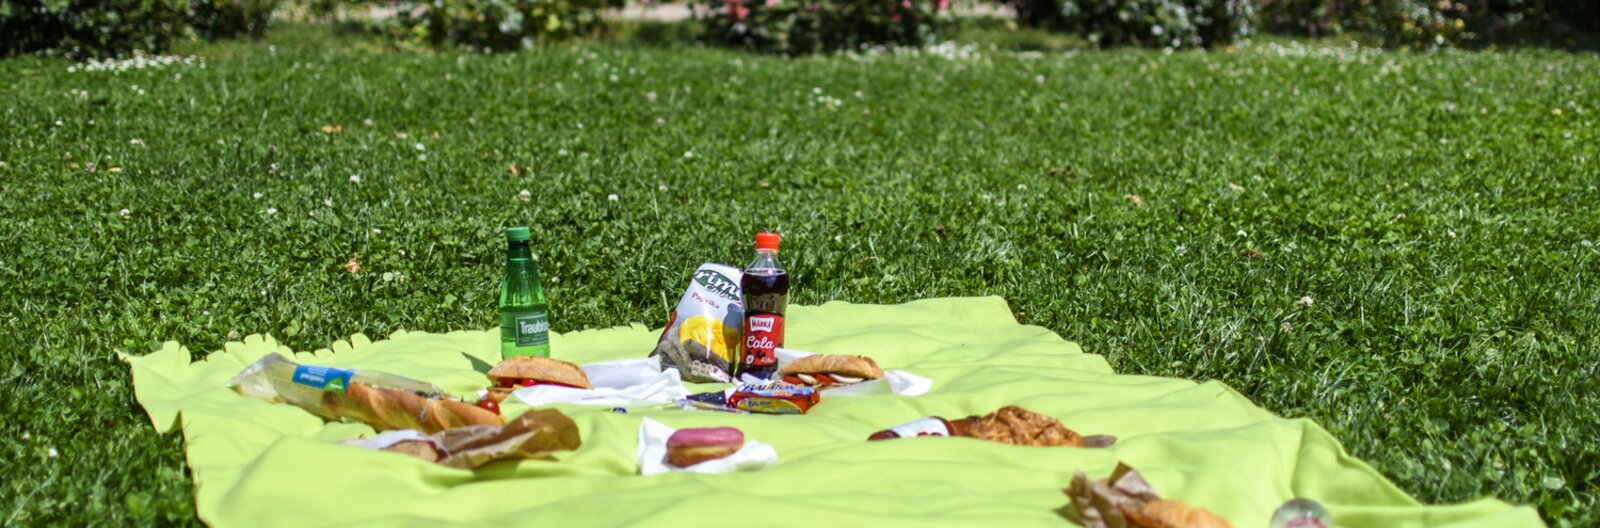 5 downtown Budapest parks perfect for impromptu picnics